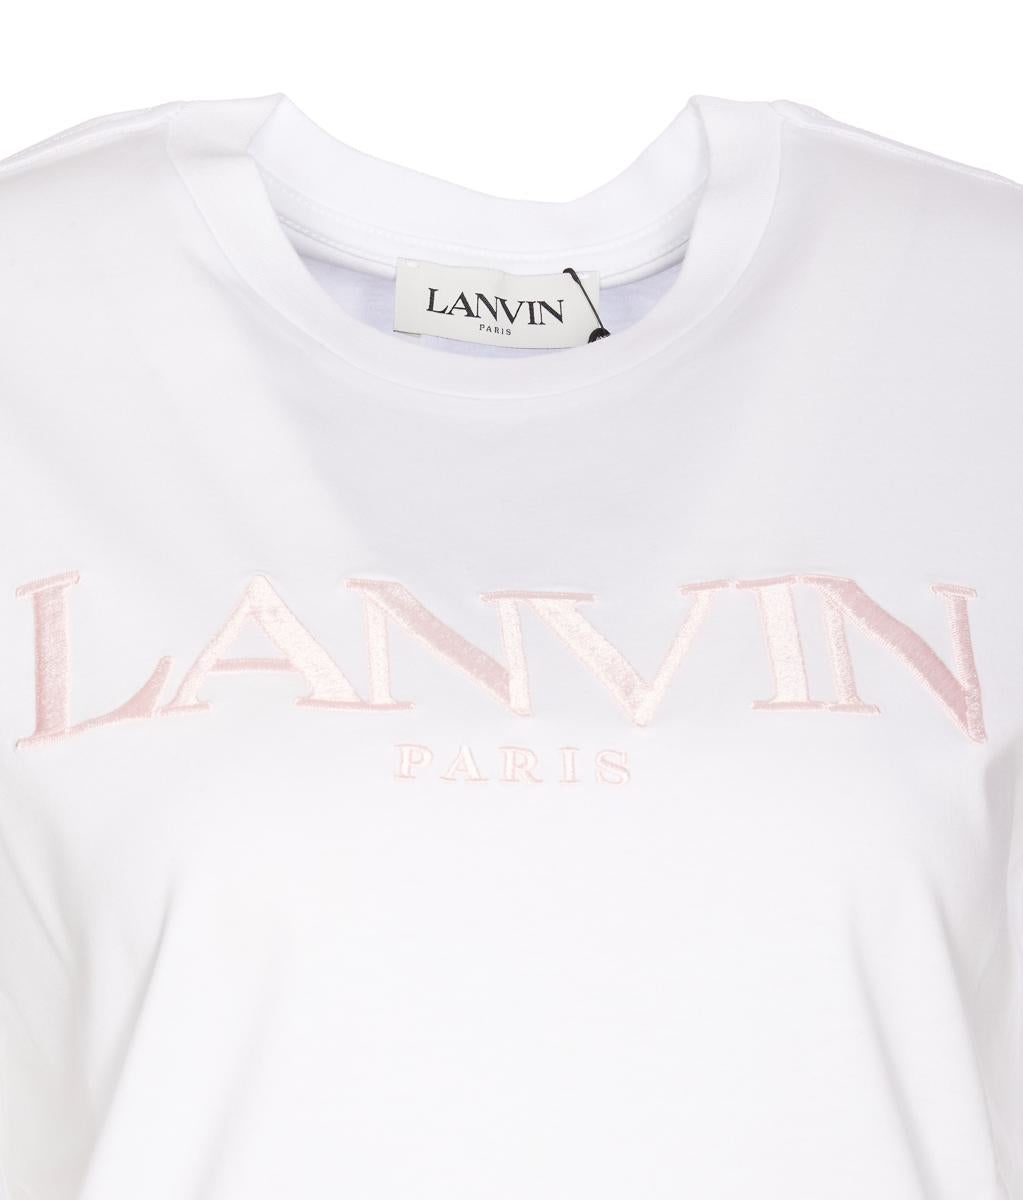 LANVIN T-SHIRTS AND POLOS - 4